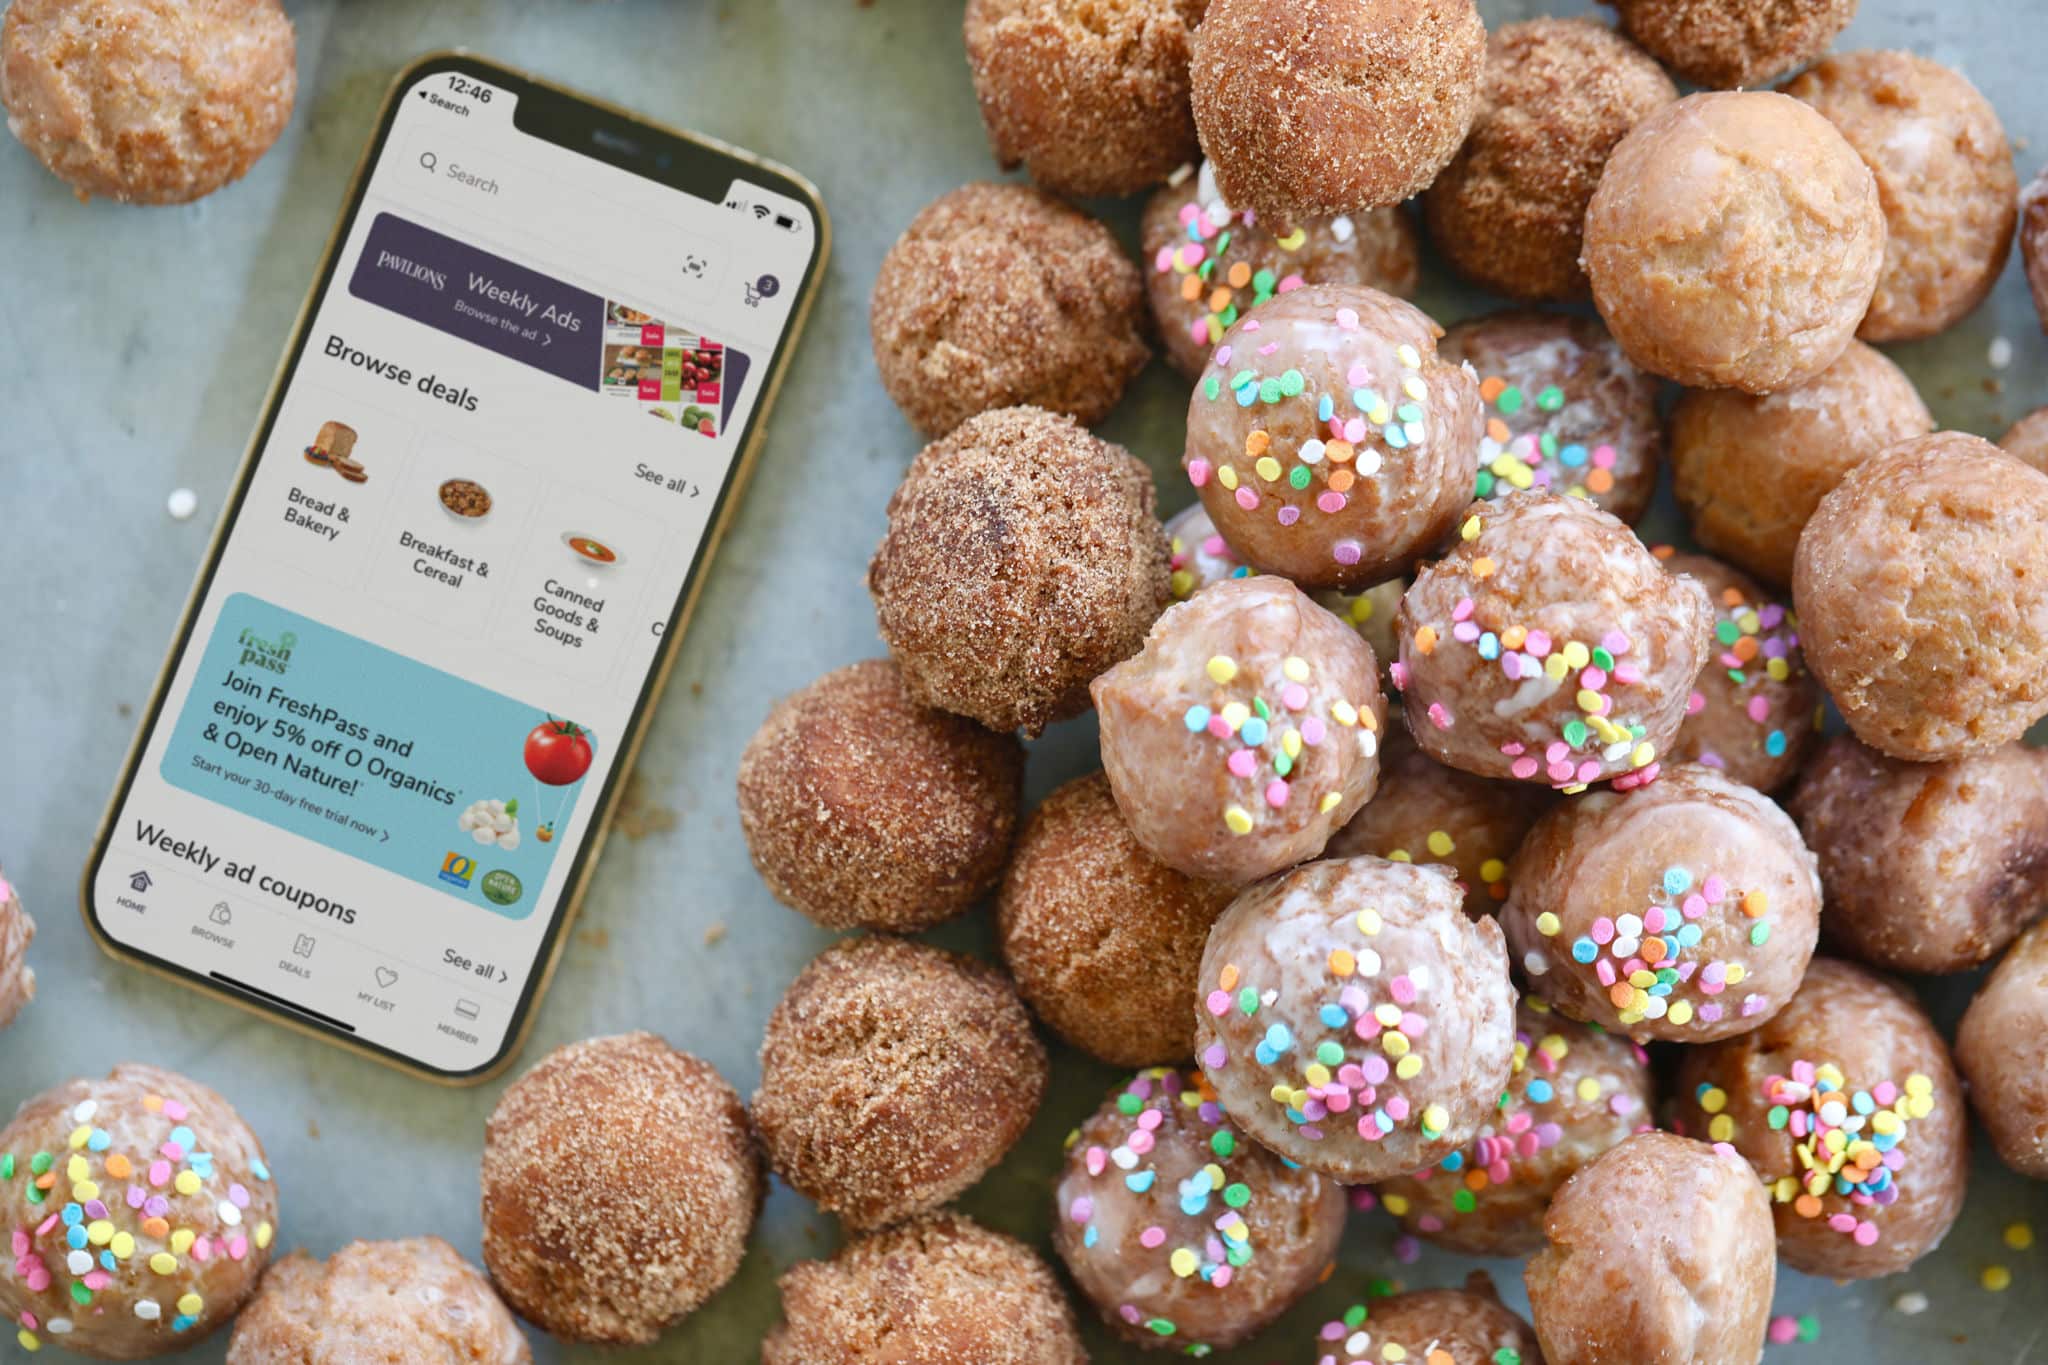 Donut holes next to an iPhone with the Pavilions app.